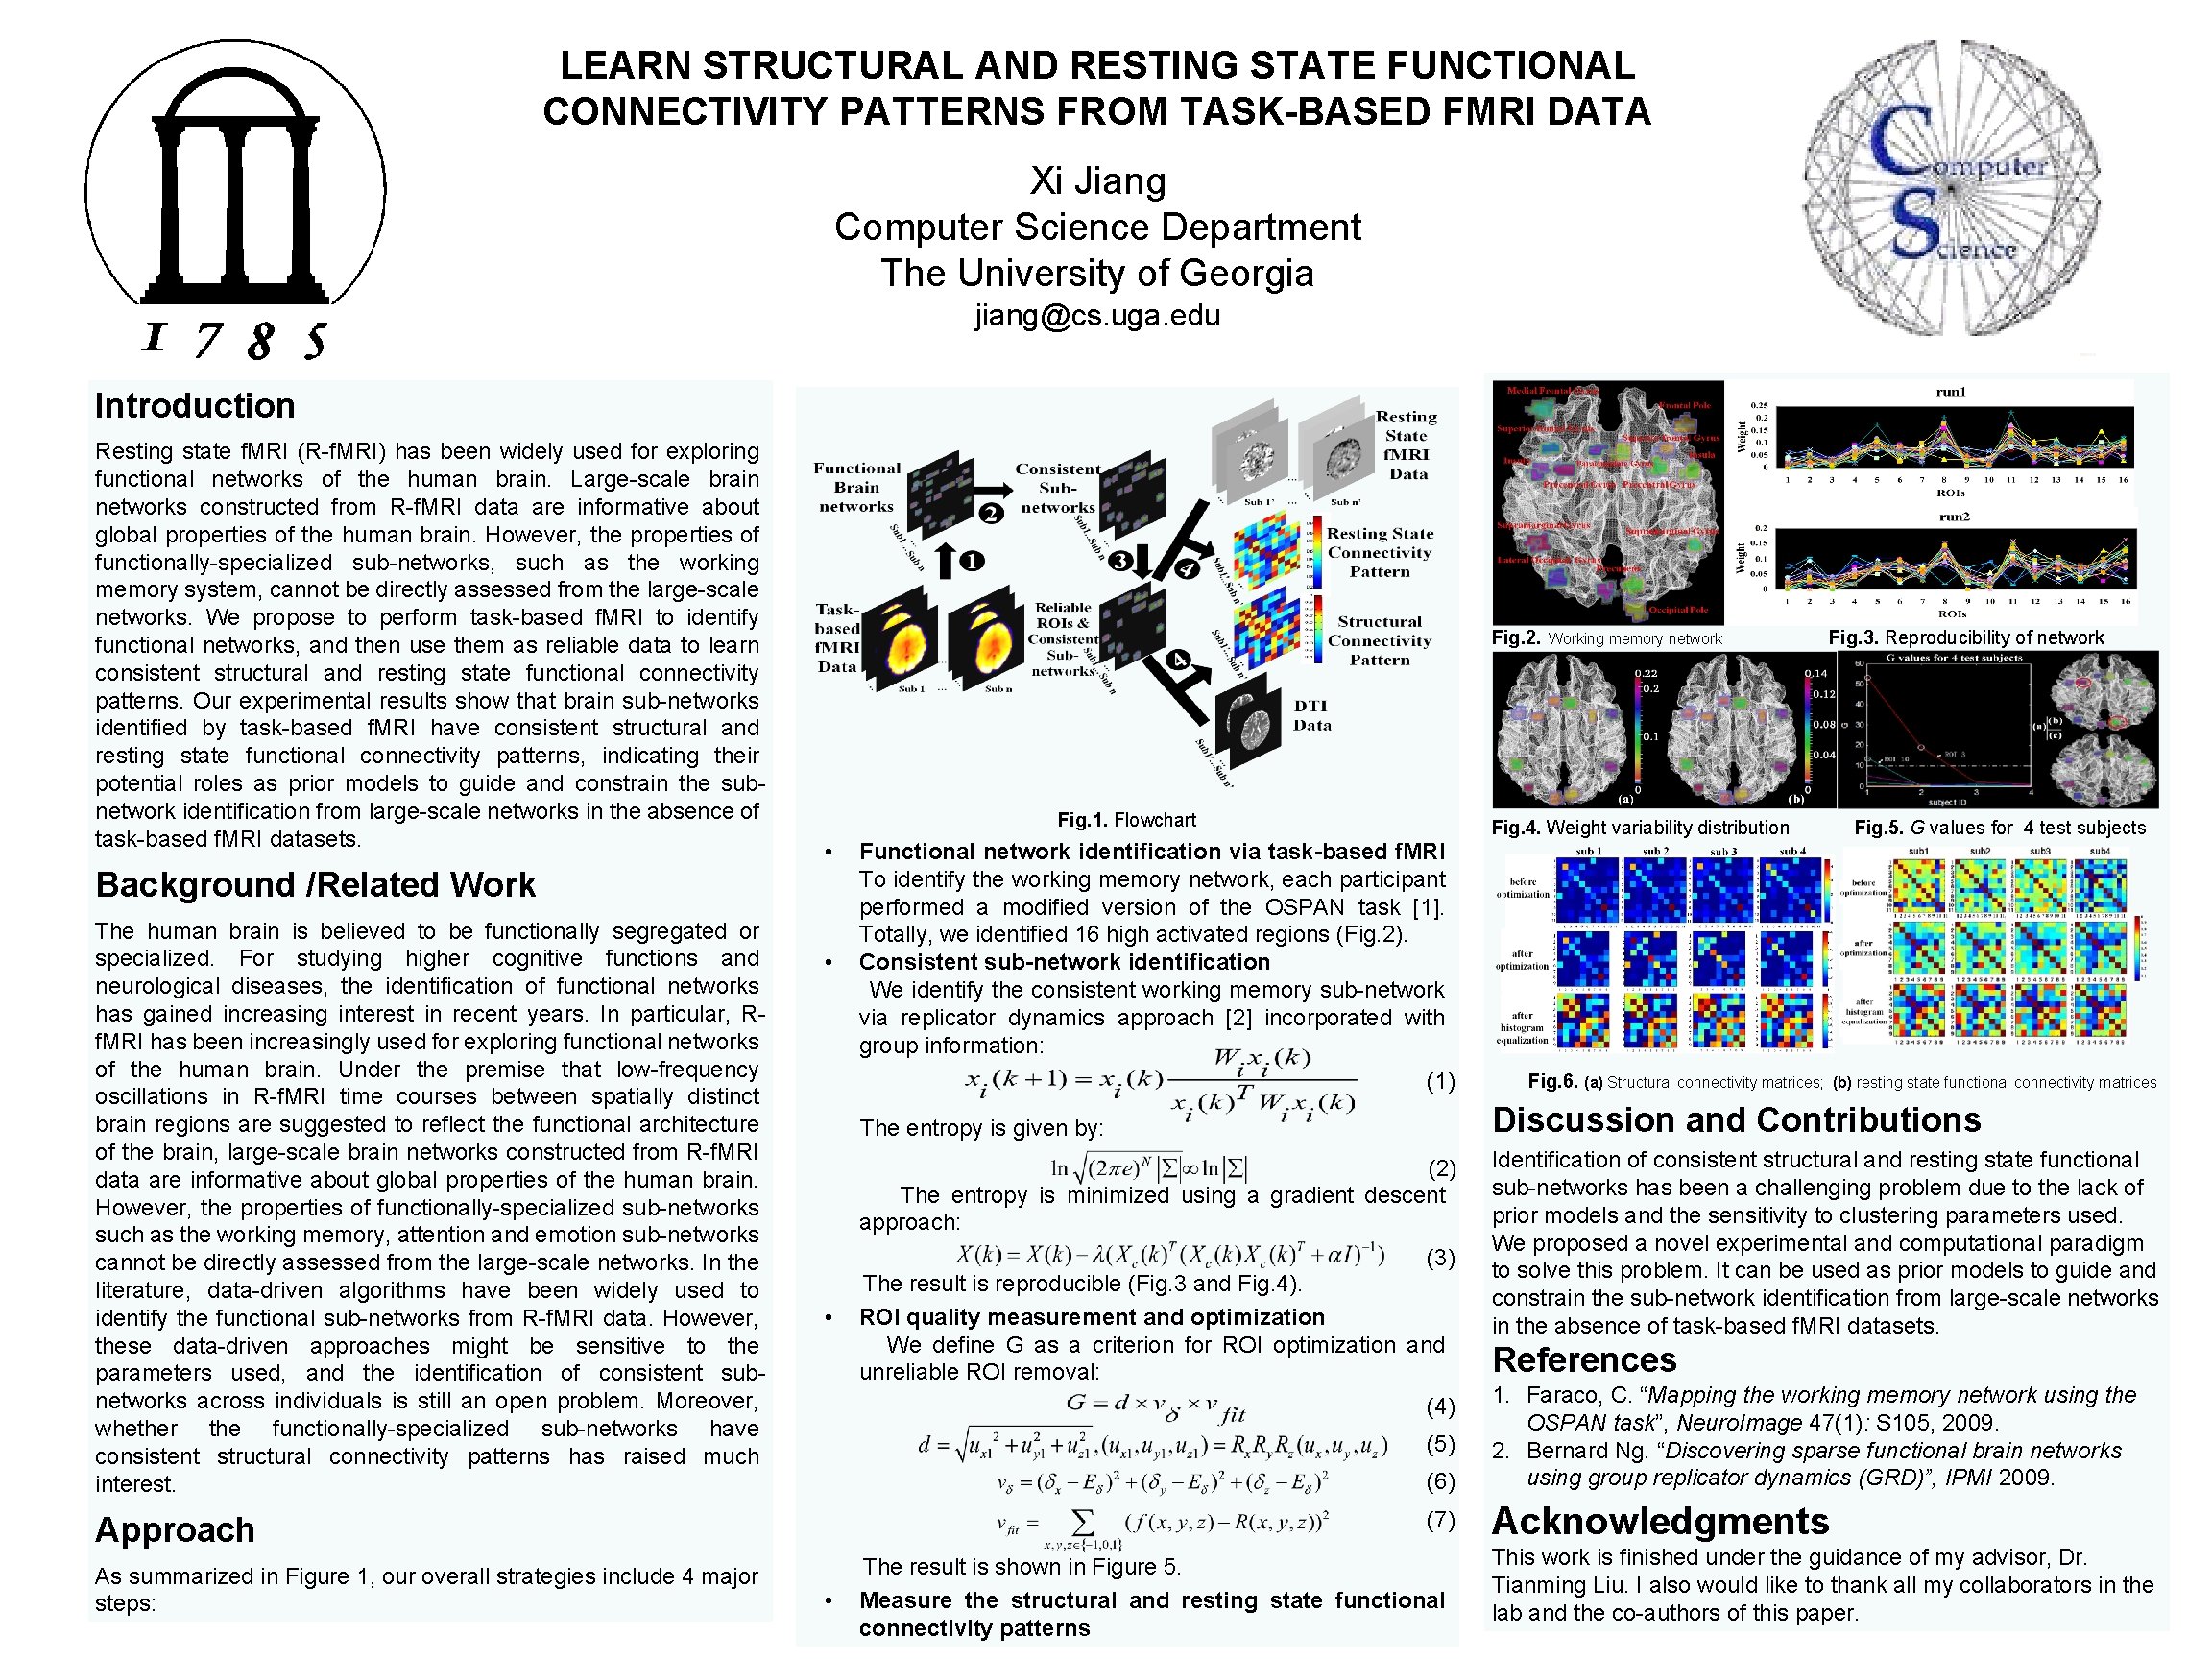 LEARN STRUCTURAL AND RESTING STATE FUNCTIONAL CONNECTIVITY PATTERNS FROM TASK-BASED FMRI DATA Xi Jiang